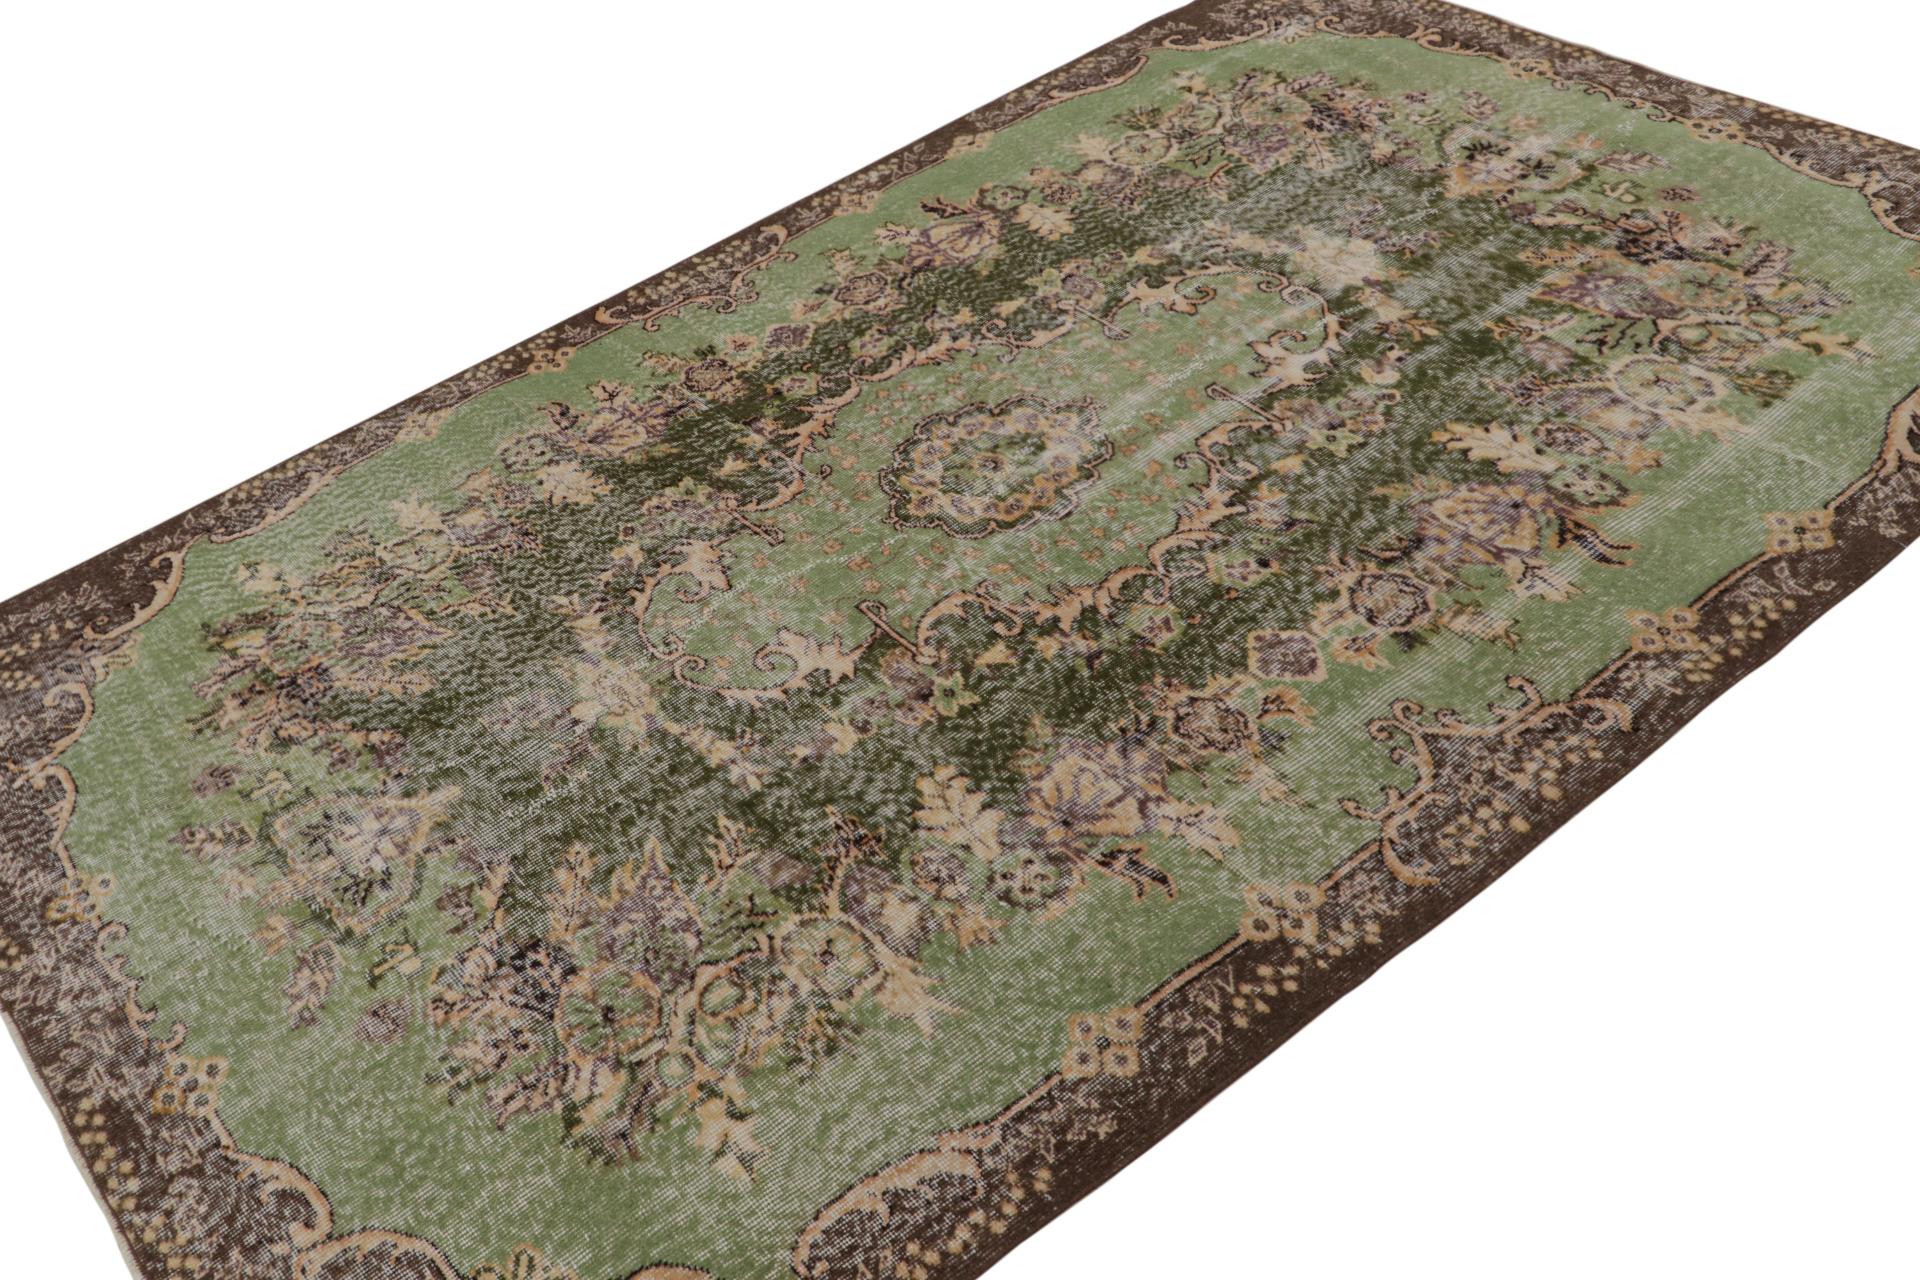 and-knotted in wool, circa 1960-1970, a vintage 6x9 rug believed to hail from Zeki Müren - latest to join Rug & Kilim’s collection of vintage selections. 

On the Design: 

Inspired by French Aubusson and Savonnerie rugs, this vintage rug is a